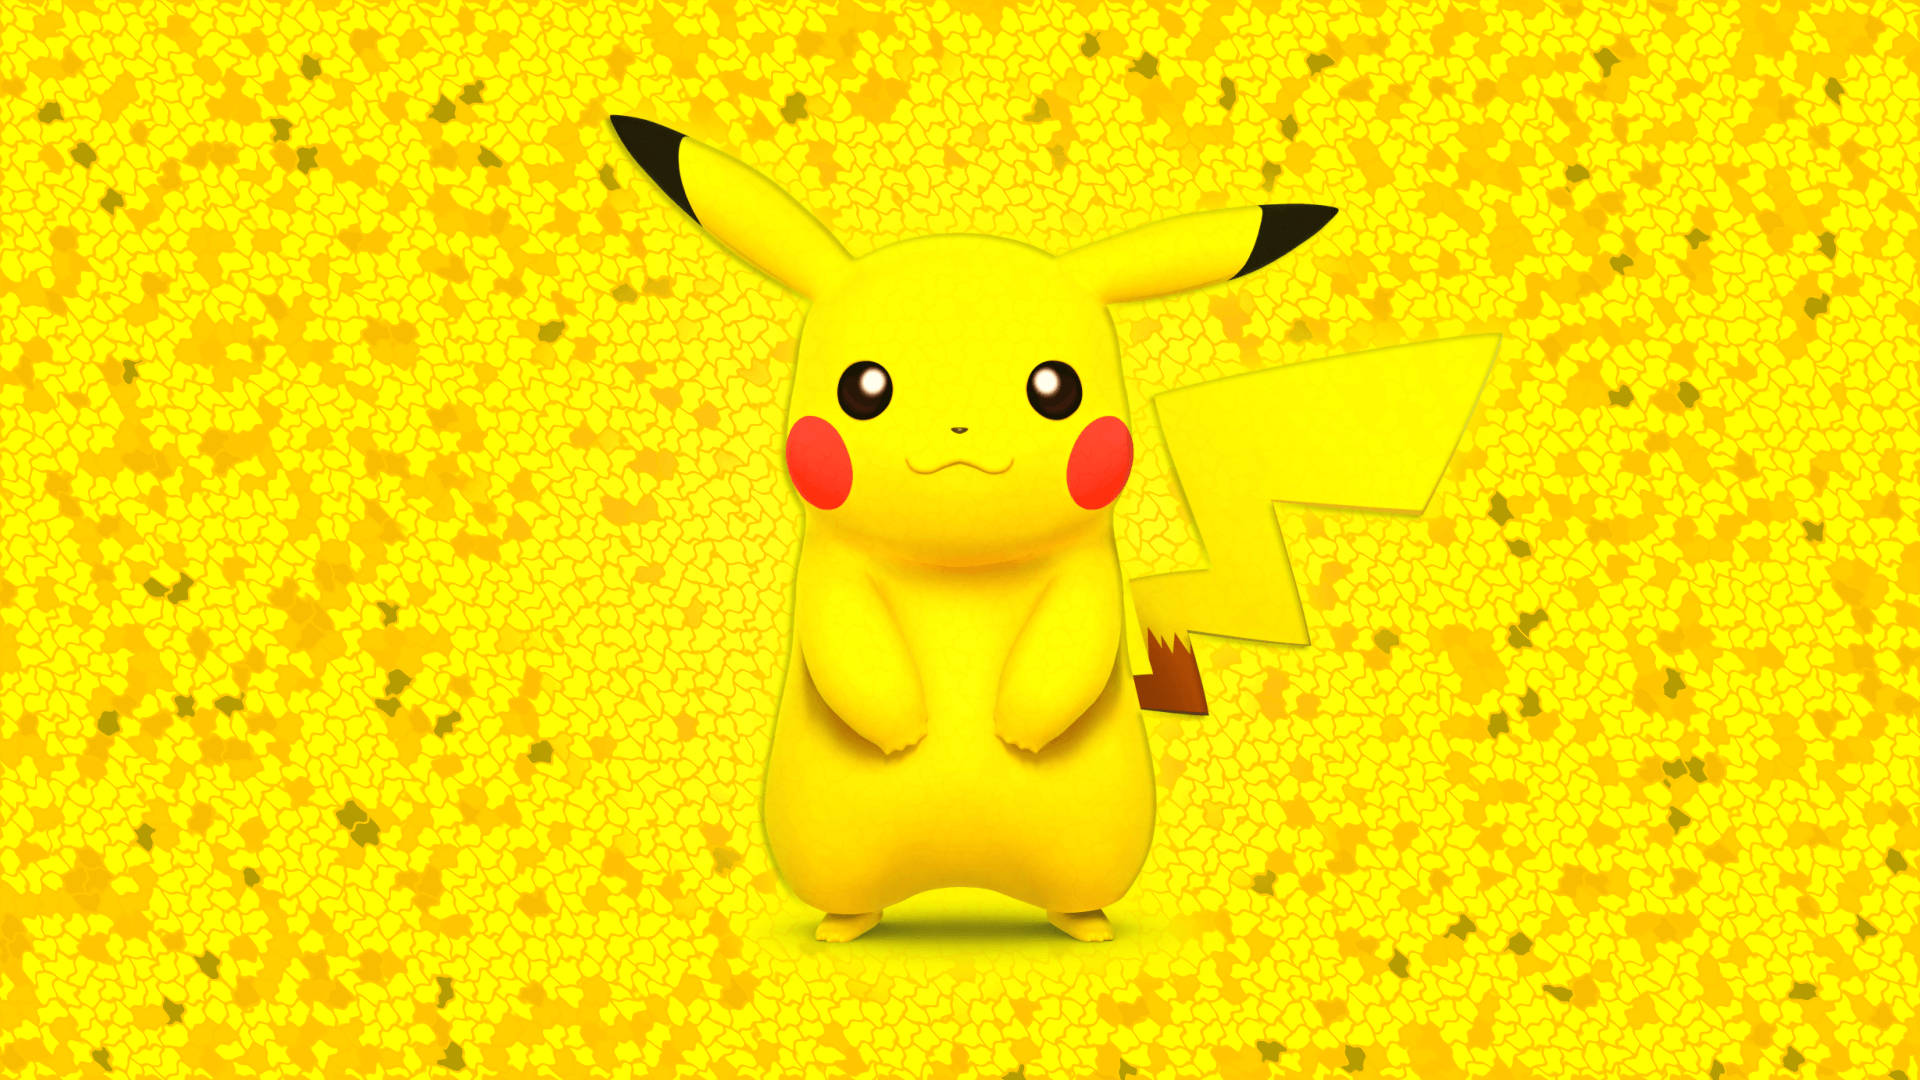 Endearing Pikachu In Collage Background